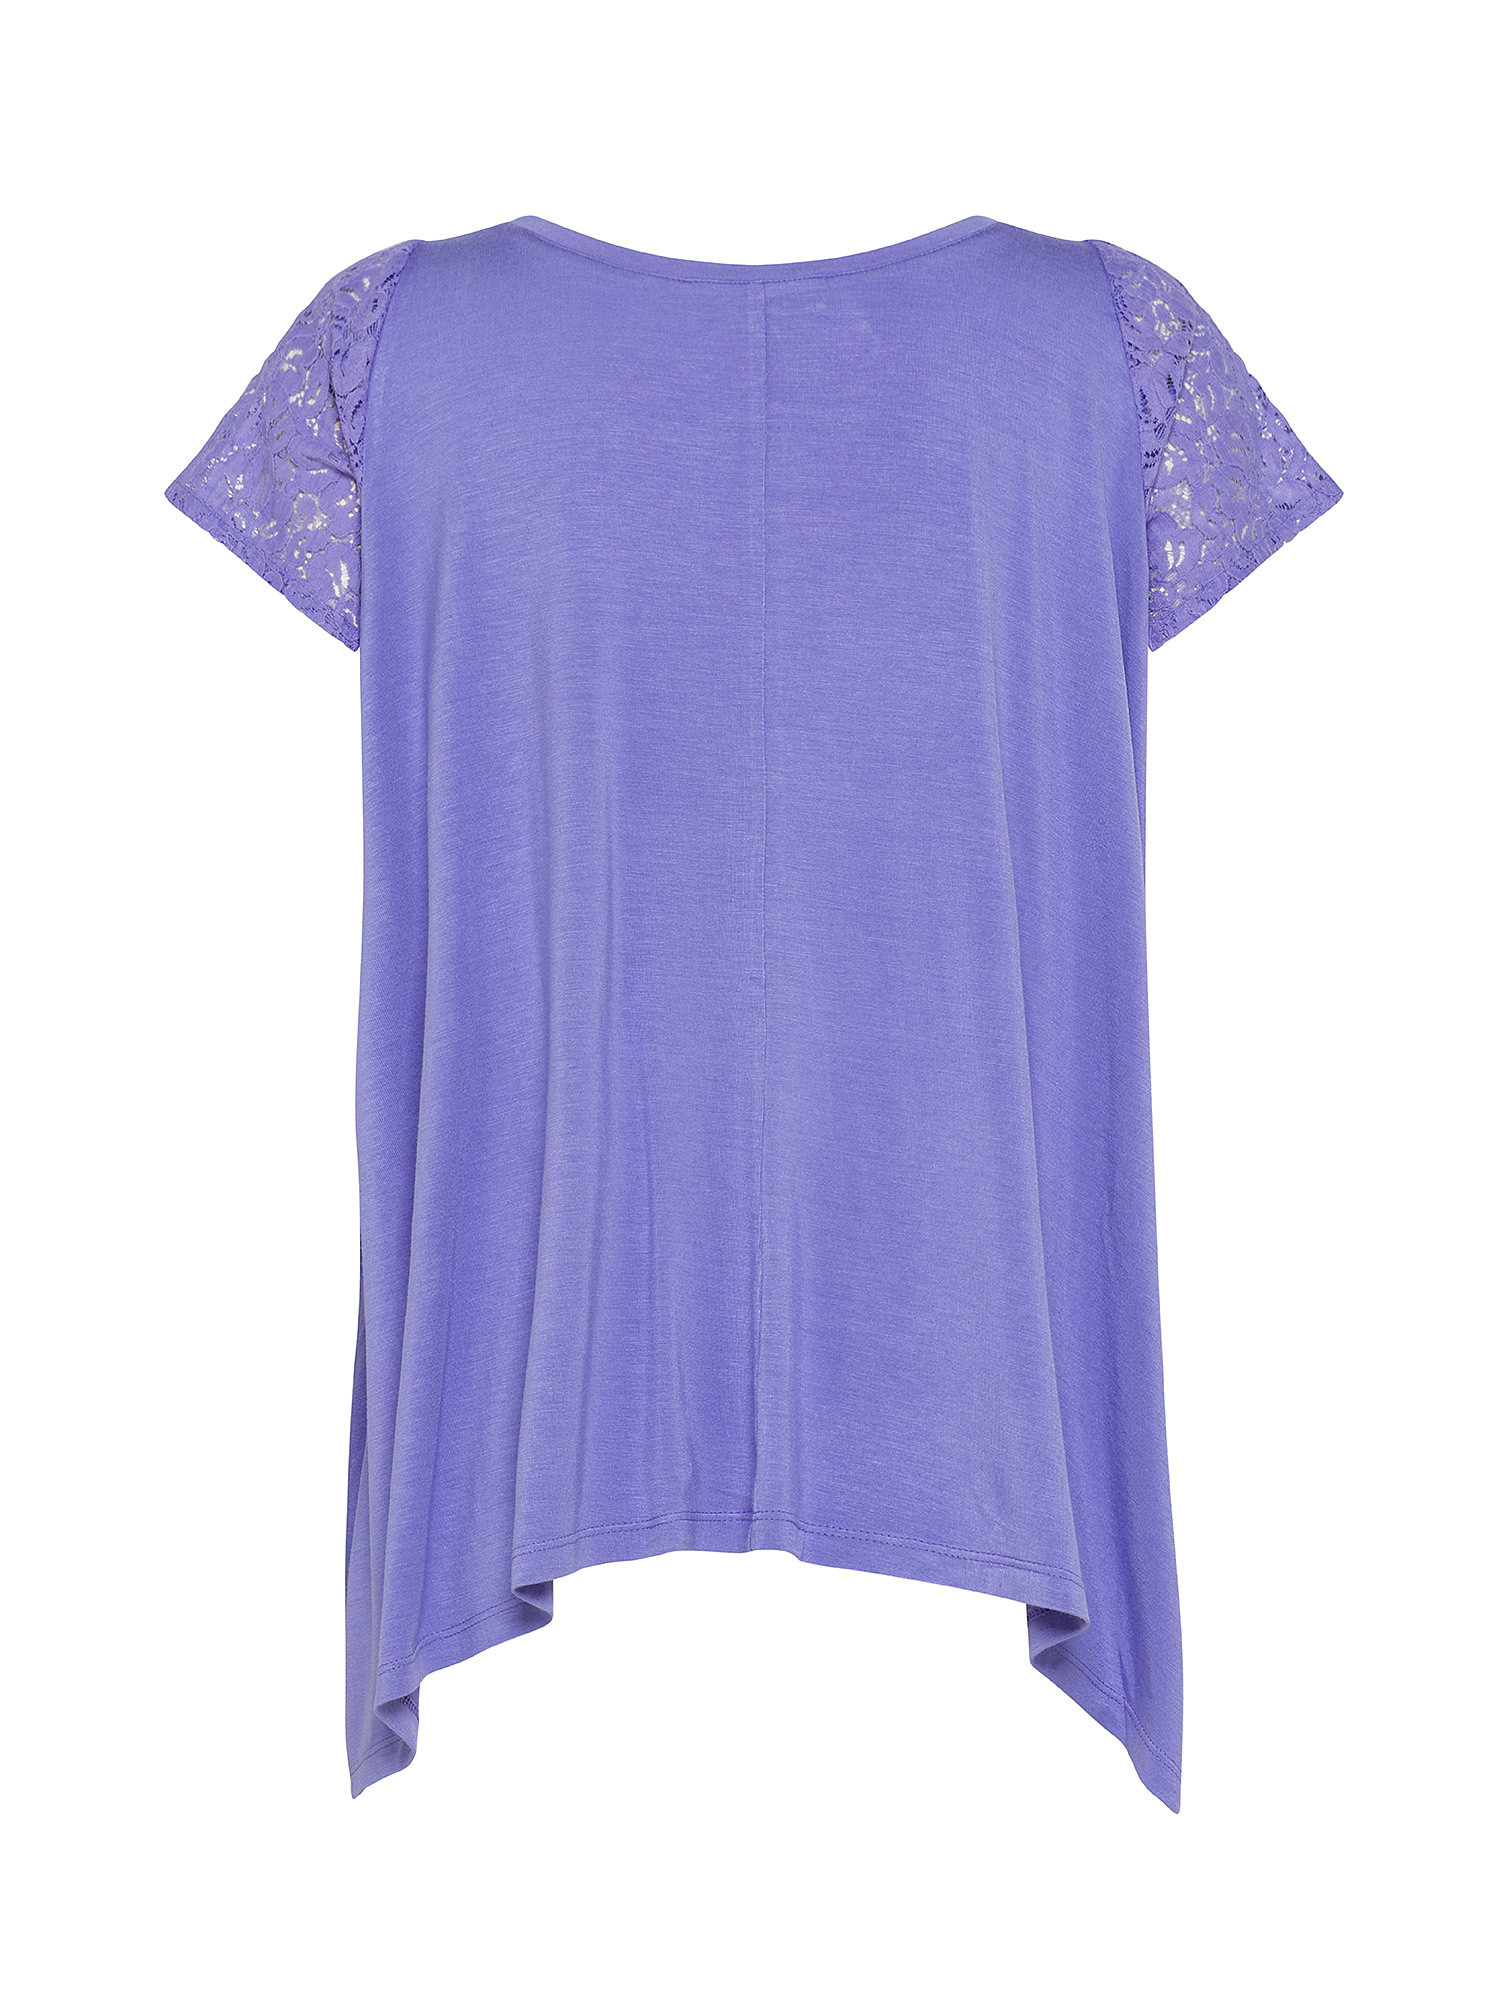 Koan - Flared T-shirt with lace, Purple Lilac, large image number 1